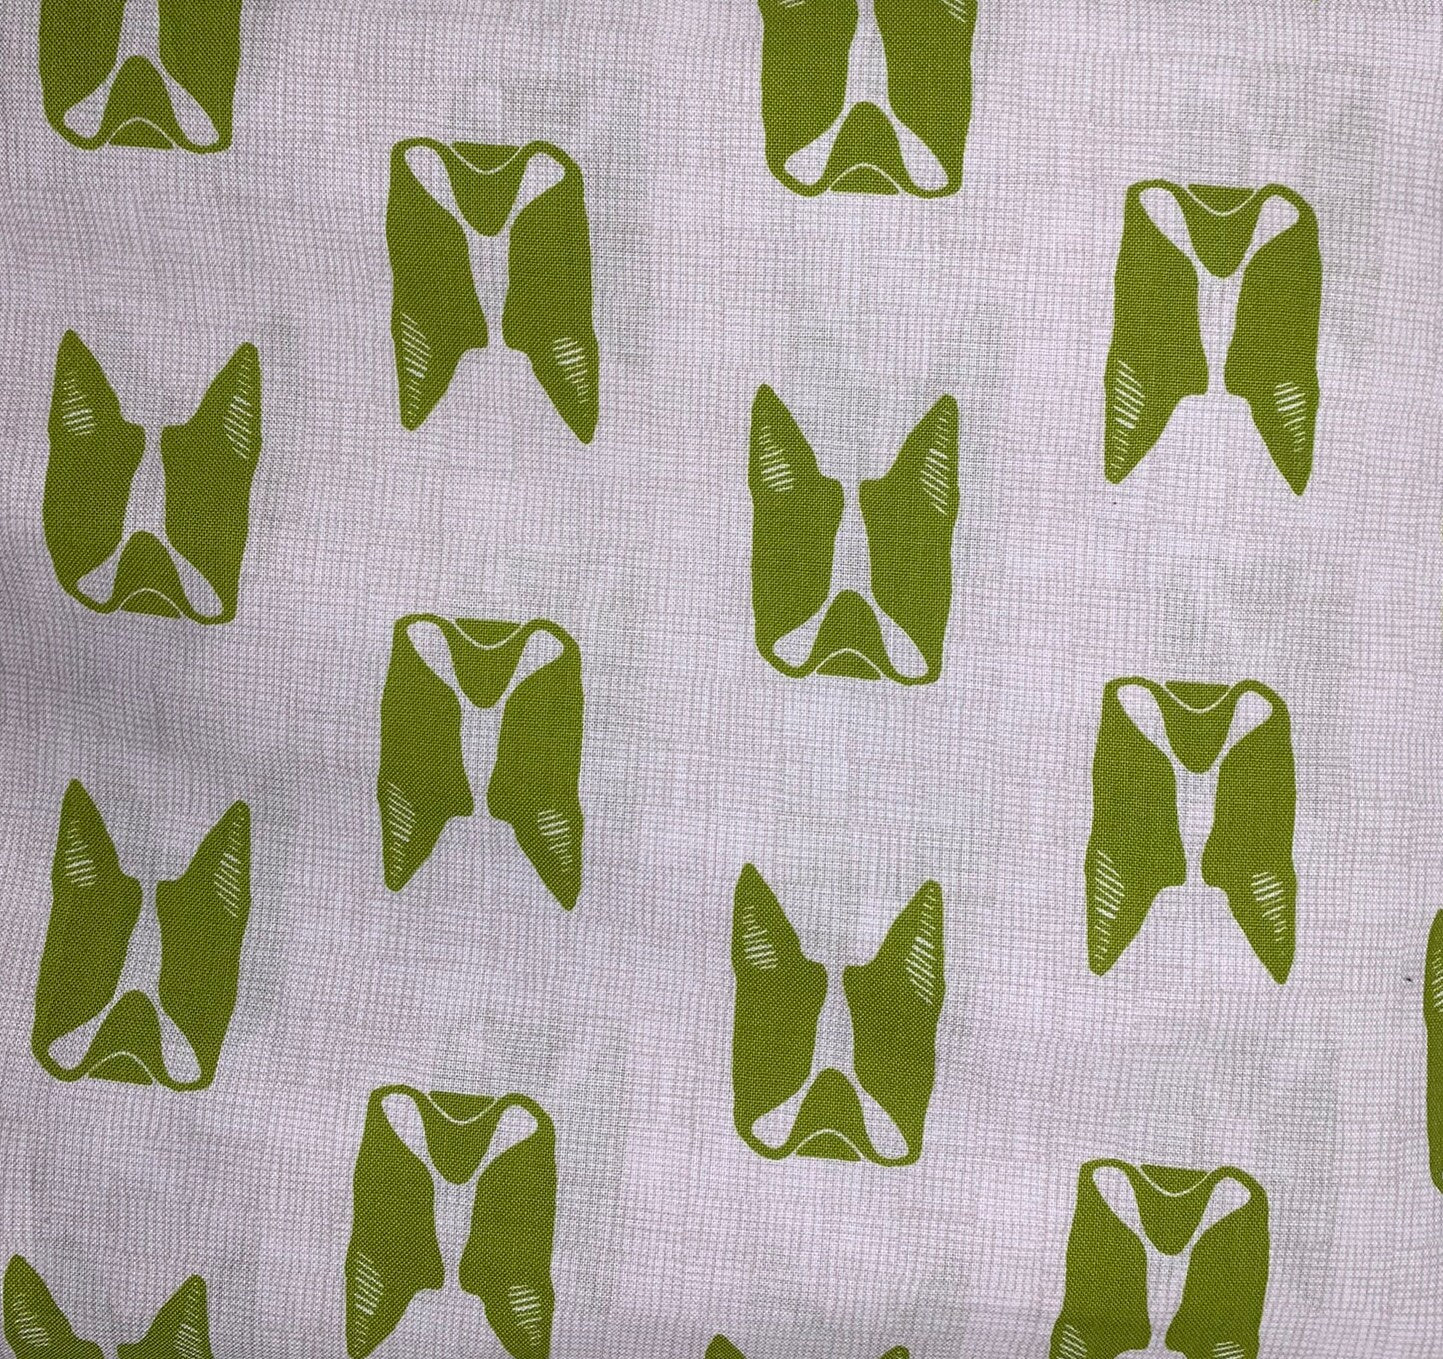 High Quality Quilt Fabric-Sold by the Yard-Andover Fabrics- Dogs-100% Cotton Fabric